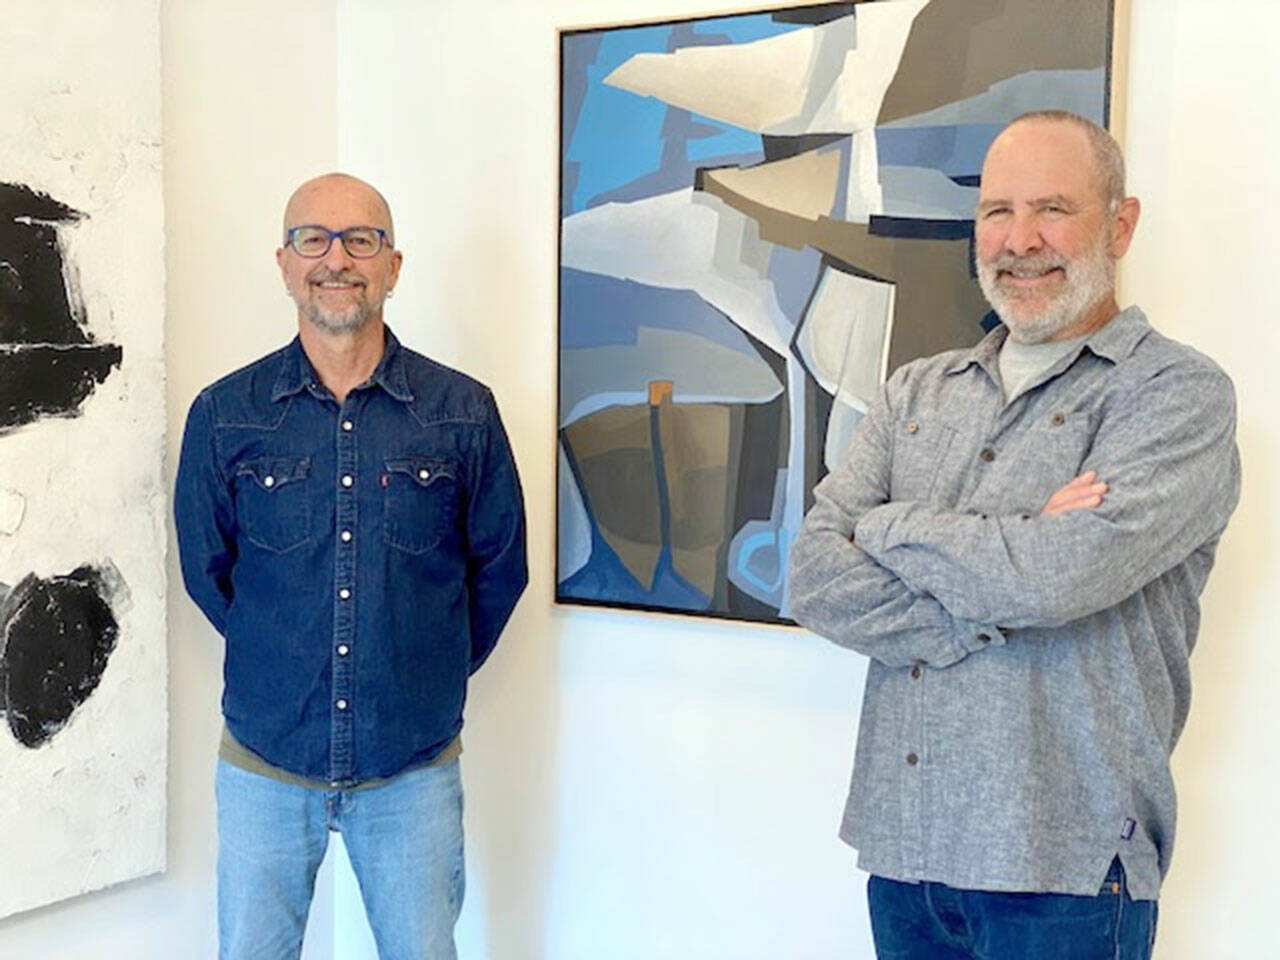 Port Townsend artists Eric Fanson, left, and Fred Videon are featured at the inaugural show at Little Wing Gallery.